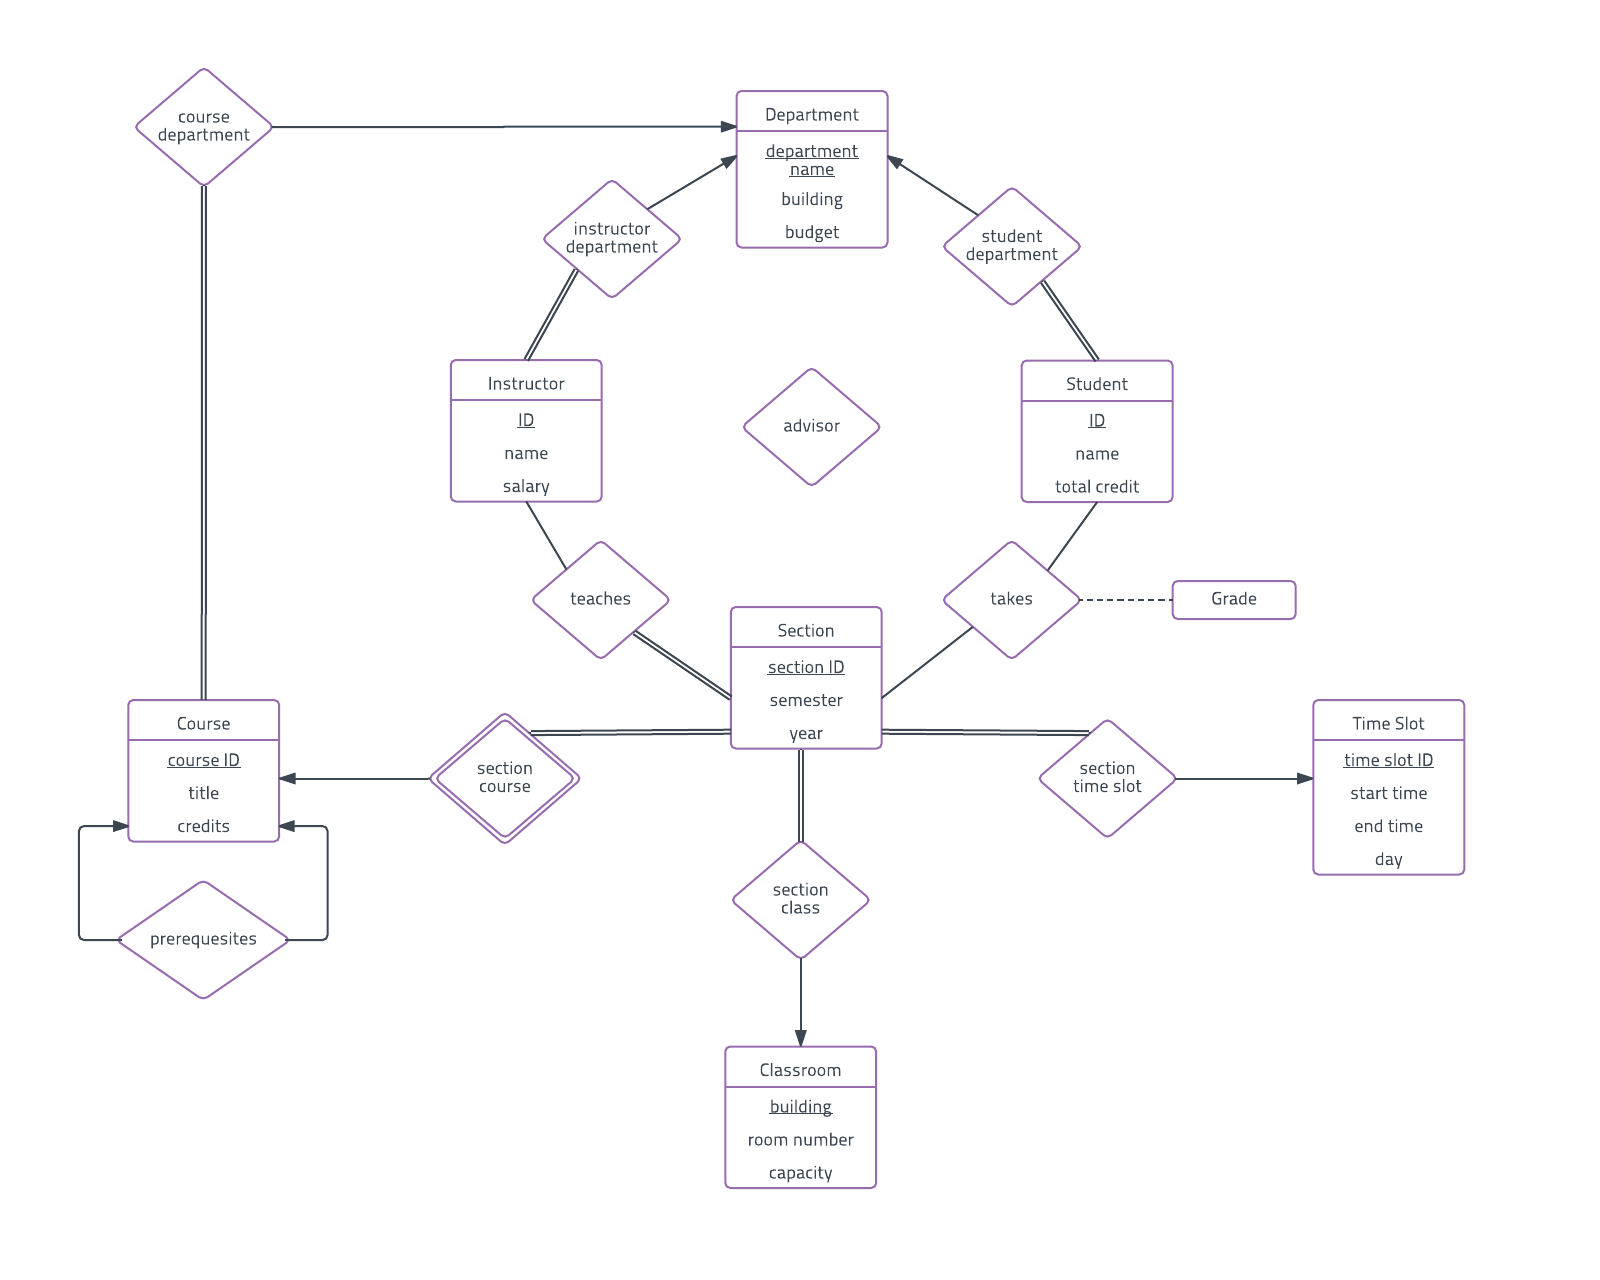 Er Diagram Examples And Templates | Lucidchart for Er Diagram Examples With Explanation Ppt